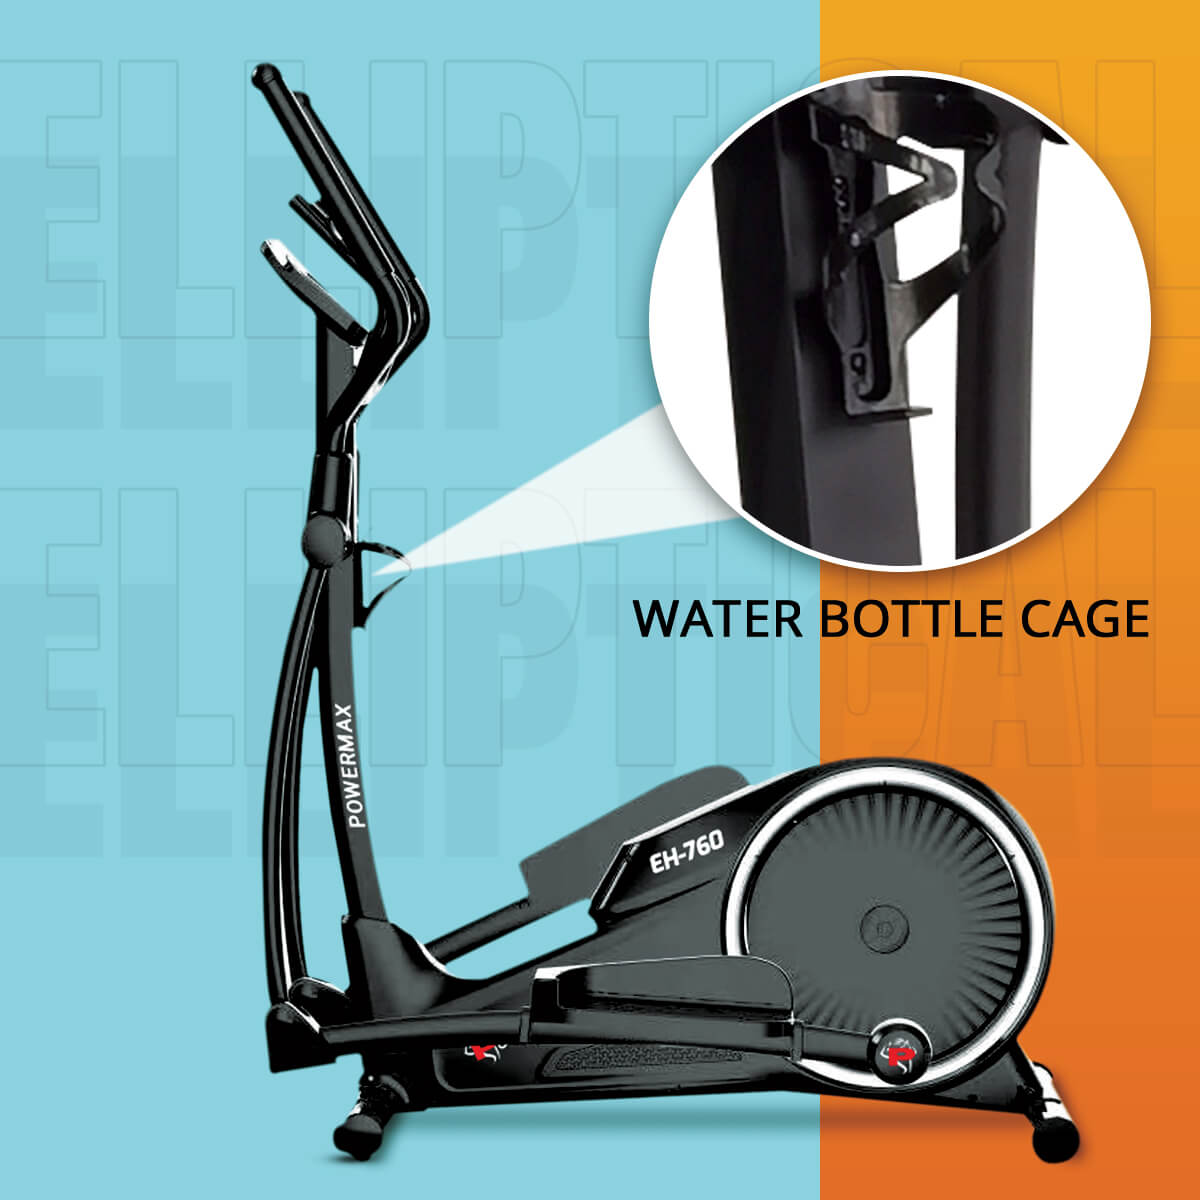 Buy Powermax Fitness EH-760 Elliptical Cross Trainer with Water Bottle Cage